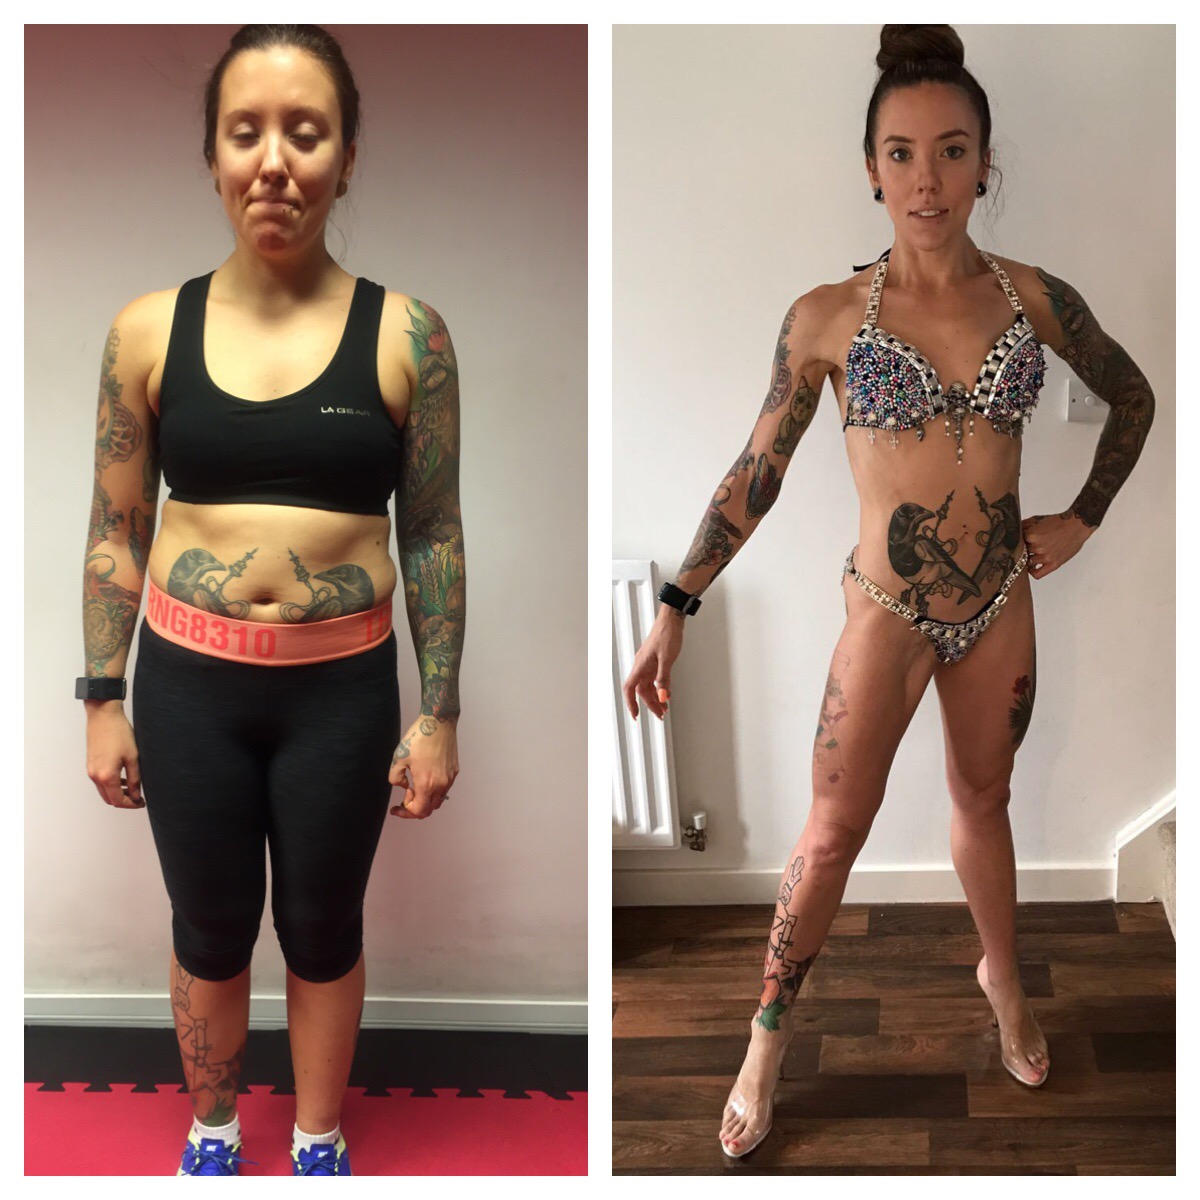 Image of Personal Training Client and Fitness Model Competitor from Brentwood, Essex achieved a fantastic transformation in just 12 months